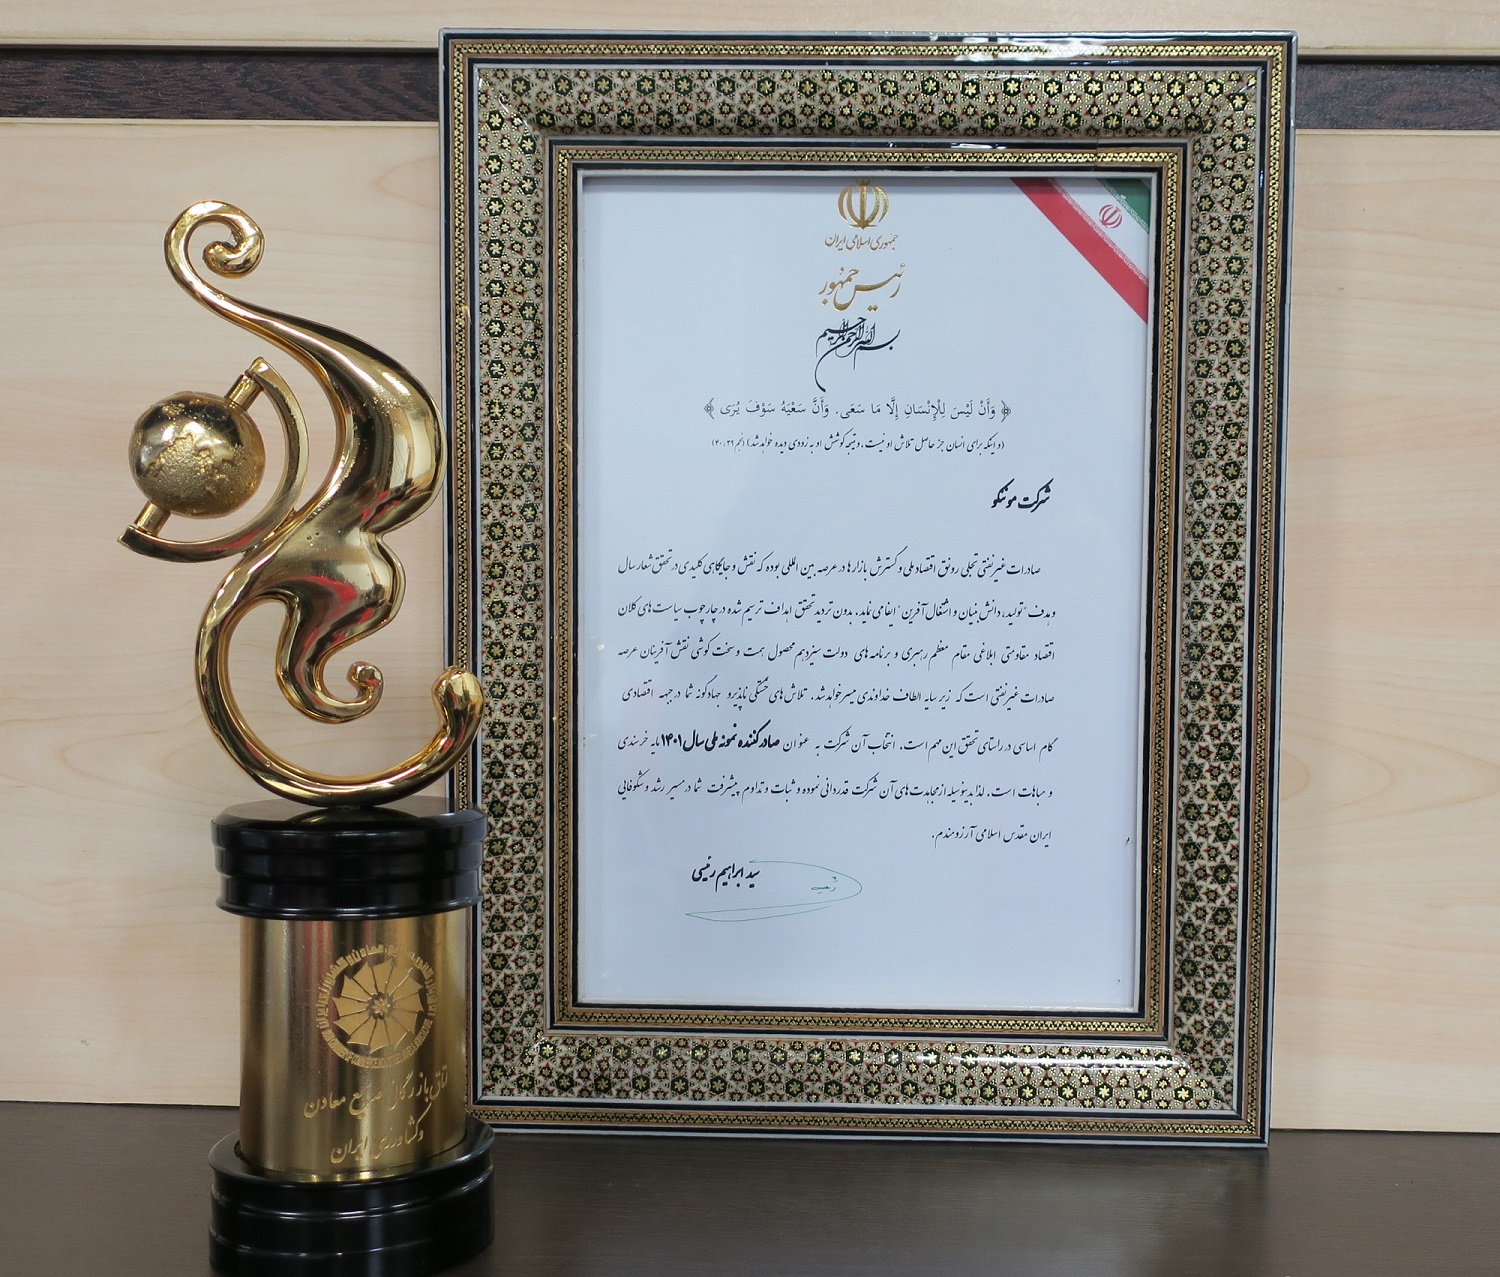 Monenco Iran has achieved Premier National Exporter Award for the third time